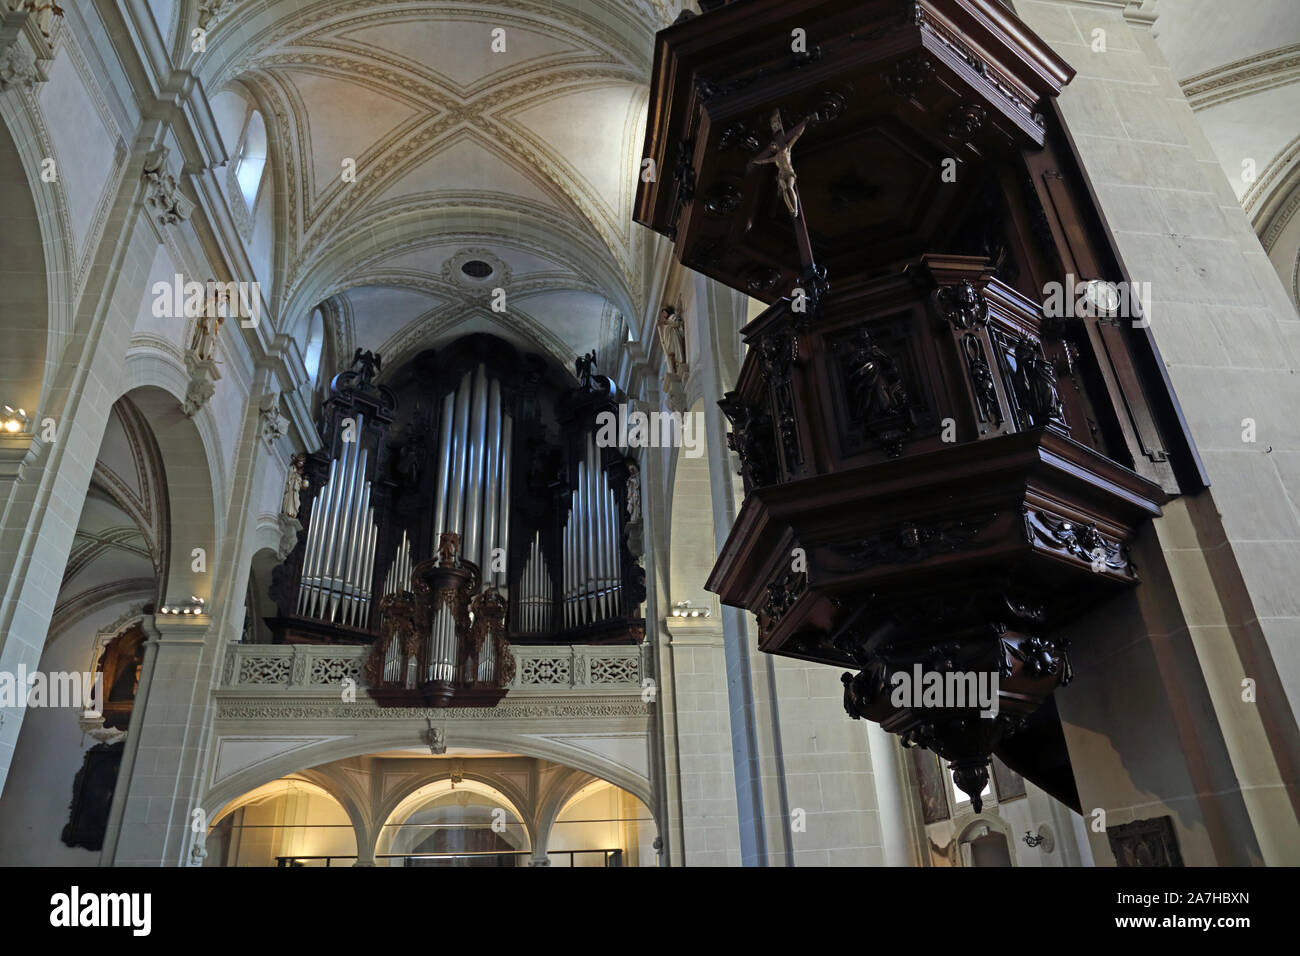 The pipe organ in the Church of St. Leodegar, located in Lucerne, Switzerland. Stock Photo